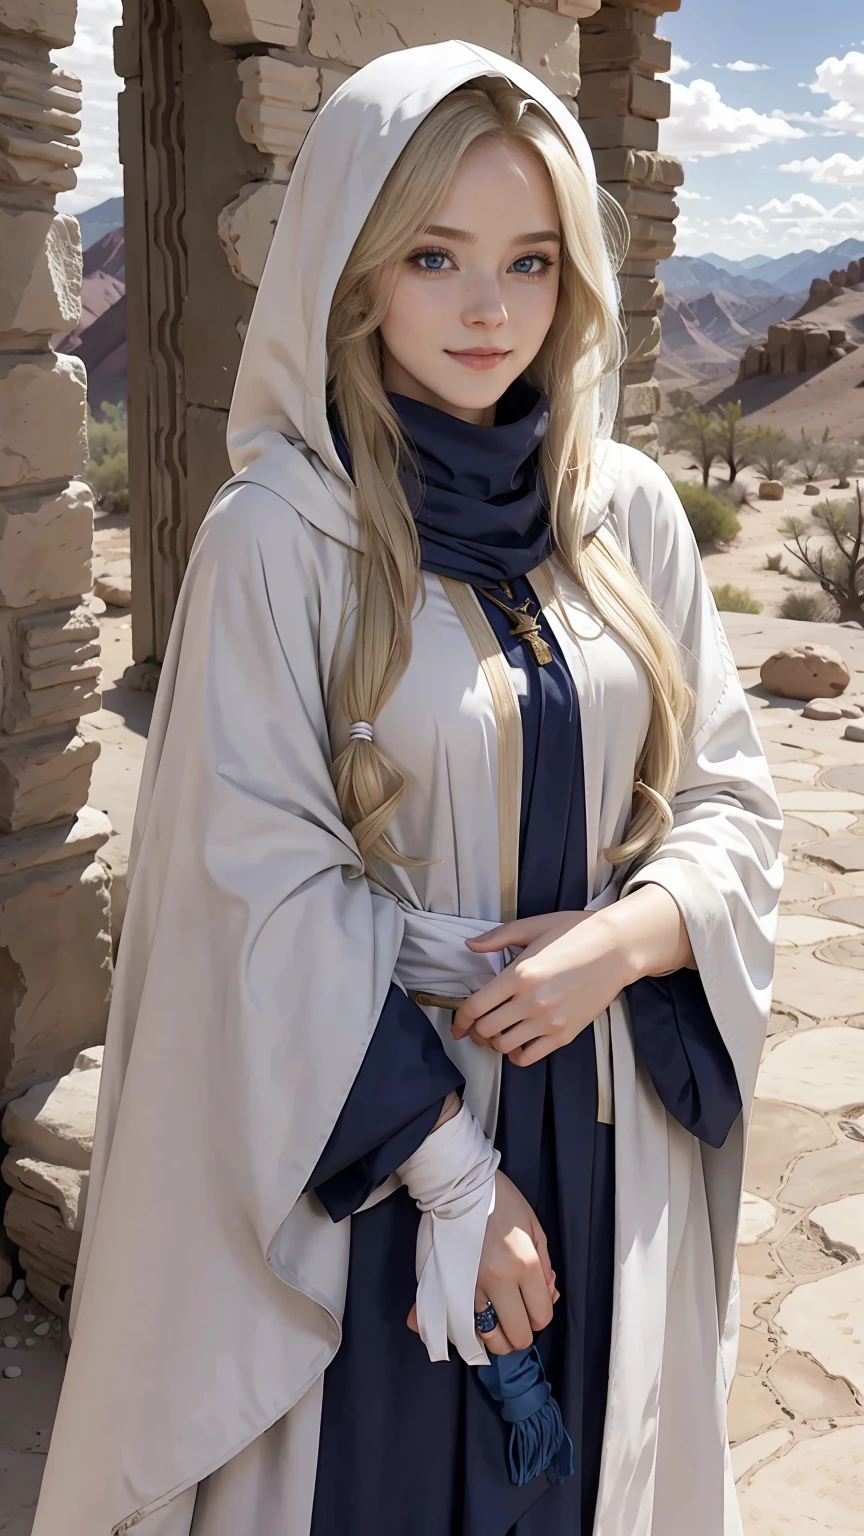 22 year old white female、hair color is blonde、blue eyes、long hair、The ends of the hair are wavy、hair is set、accessories on wrist、wears a cloak that covers the entire body、wearing a hood、wearing a muffler、covering the mouth with a muffler、Inside a ruin lined with columns in the desert、smile、hand on stone pillar